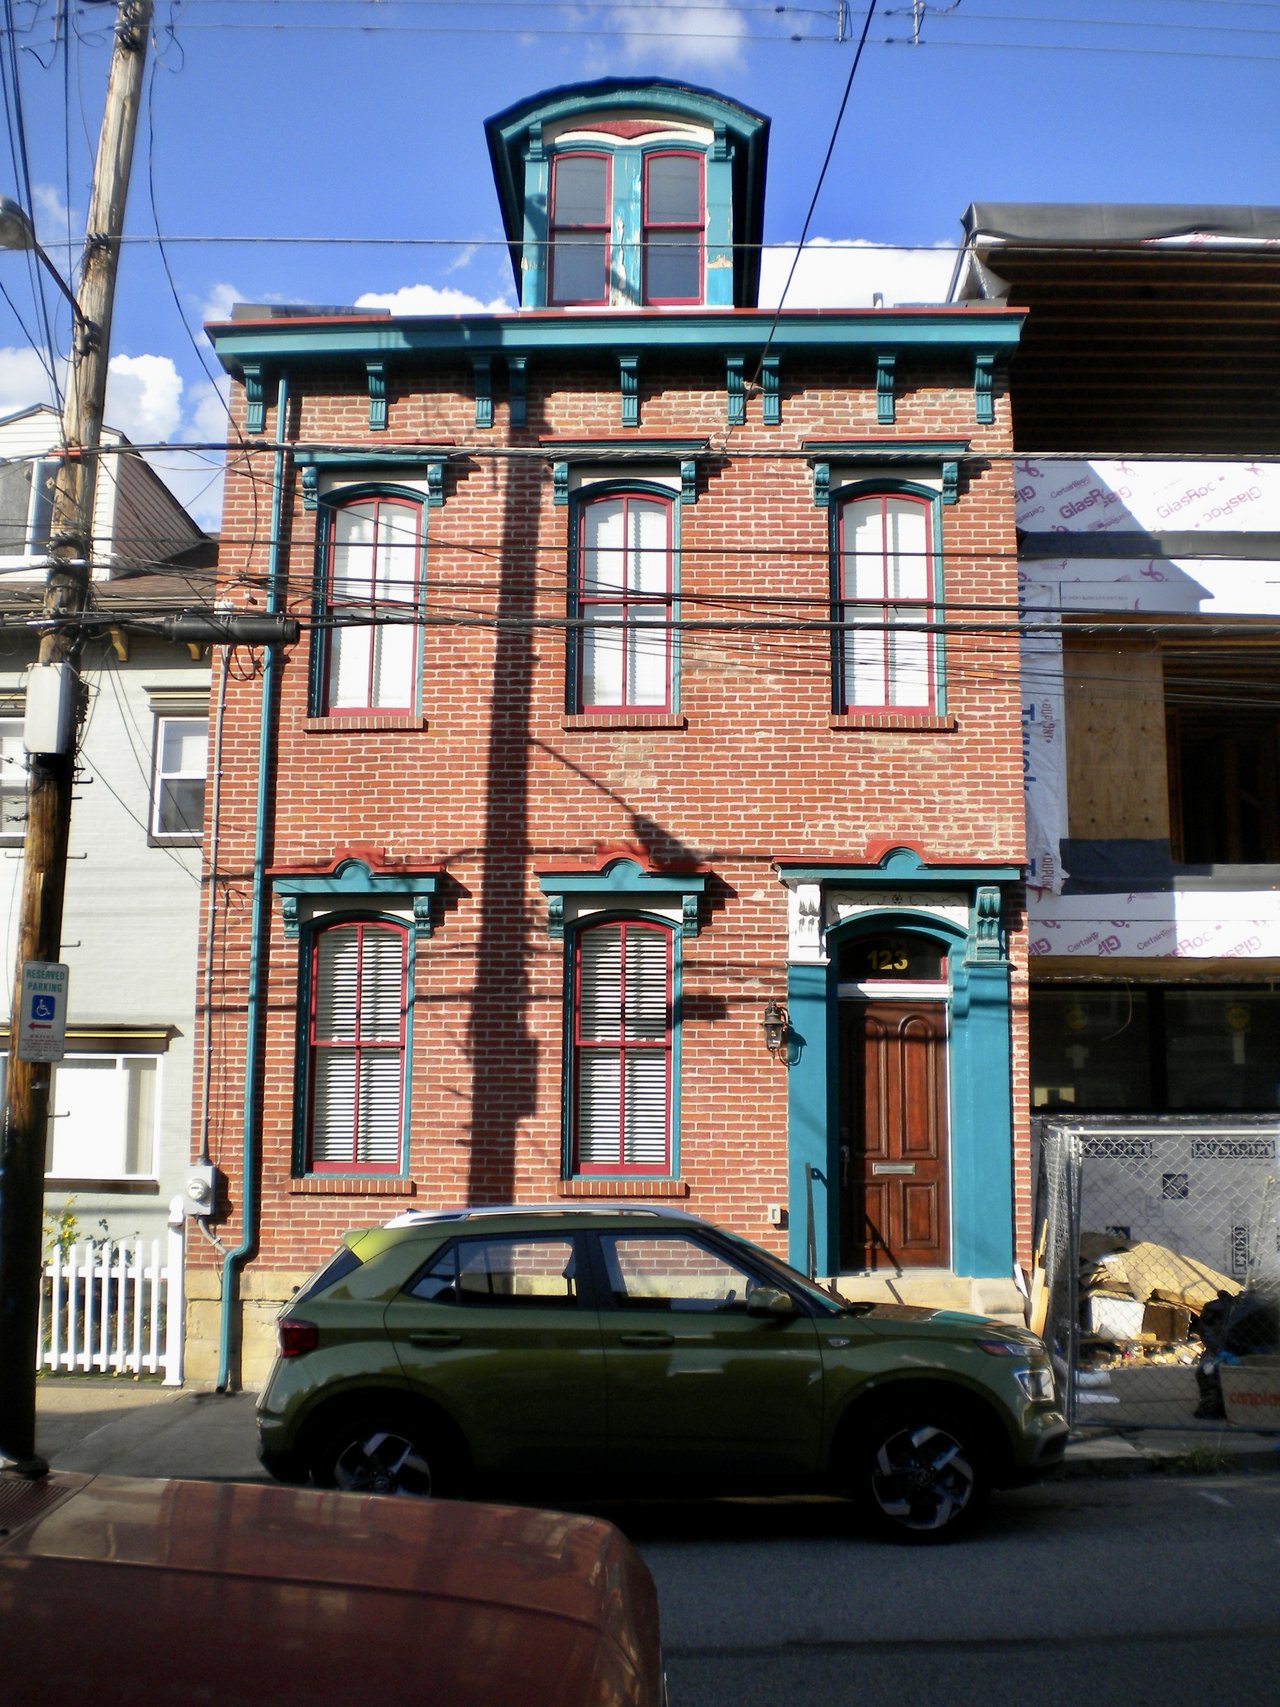 Beautiful Lawrenceville row
house